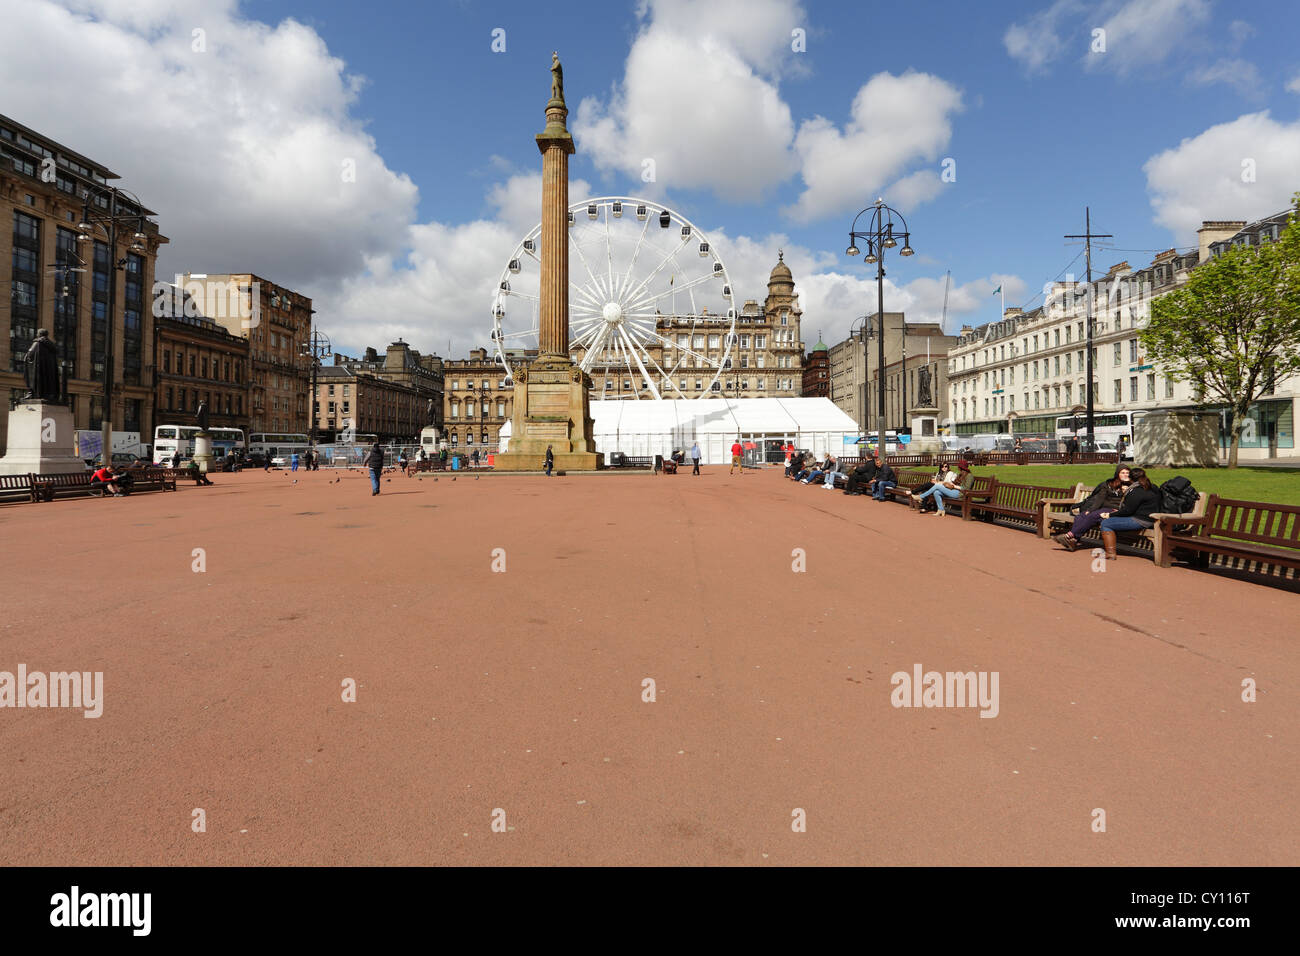 George Square with a temporary R40 Observation Wheel and old red tarmac surface in Glasgow city centre, Scotland, UK Stock Photo